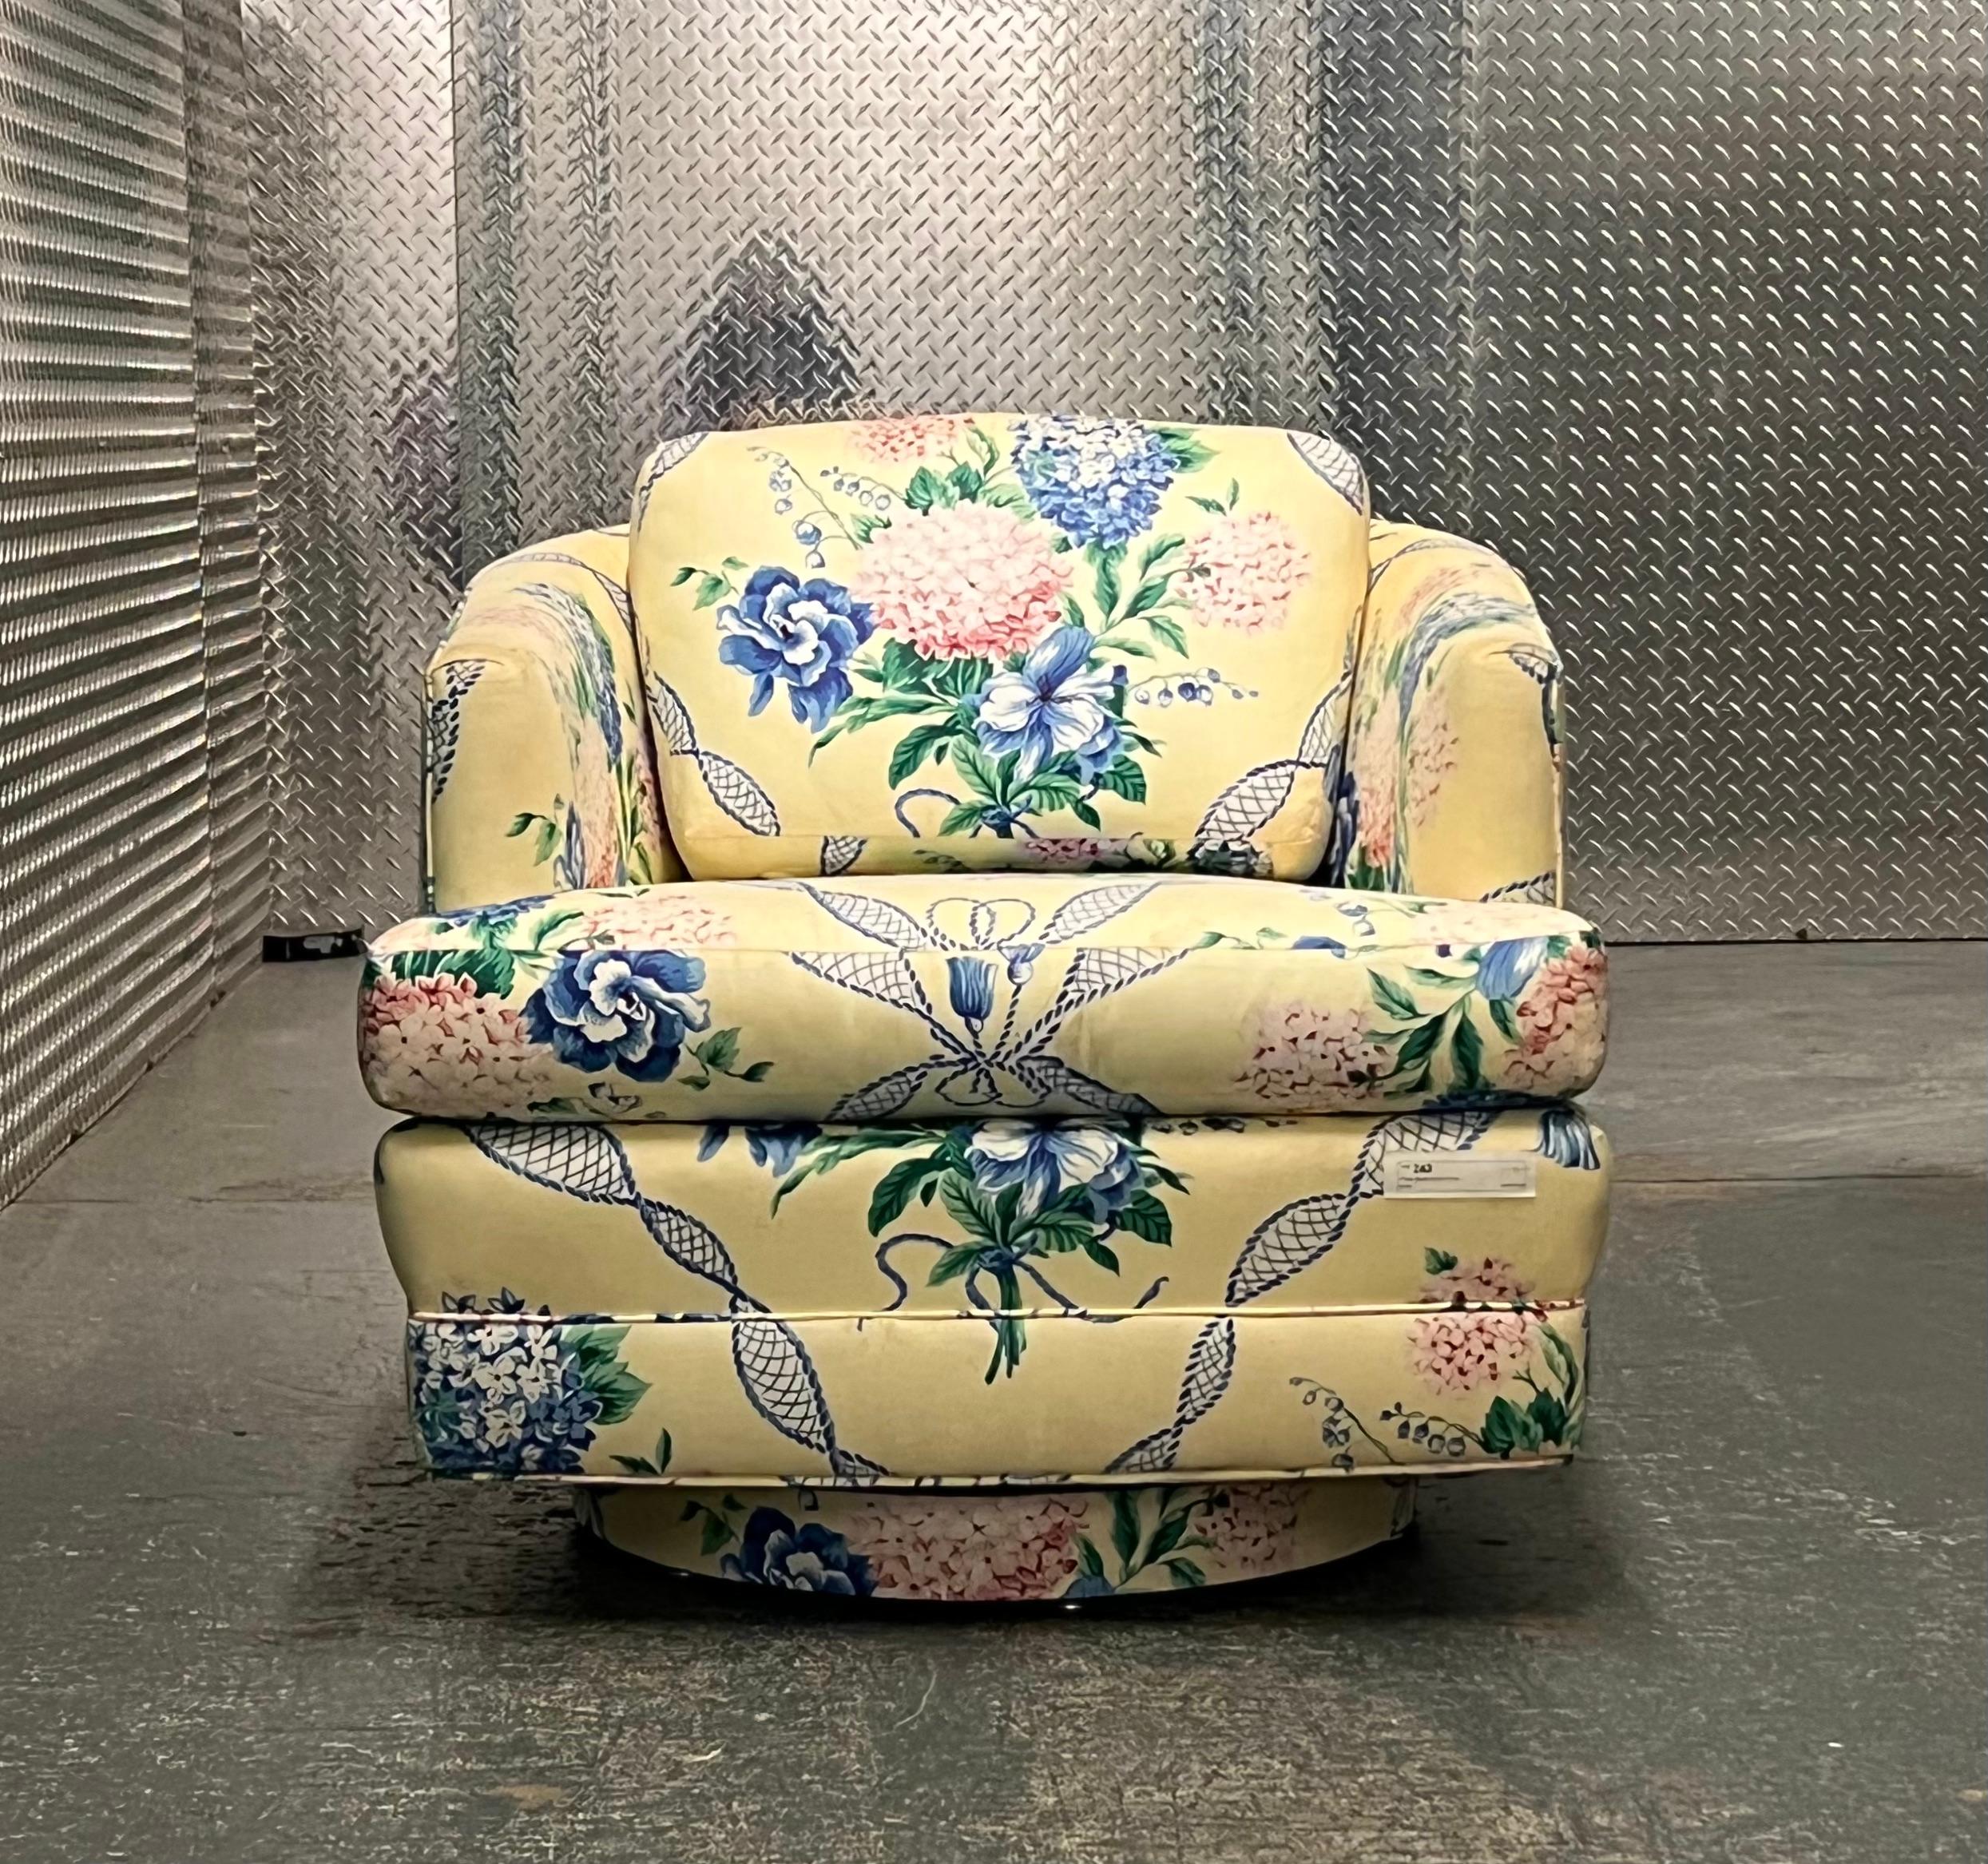 Brunschwig & Fils swivel club chair pastel yellow blue and pink floral hydrangea. A breath of fresh postmodern air for the modern interior or the pastel icing on top of a rich traditional decor.
 